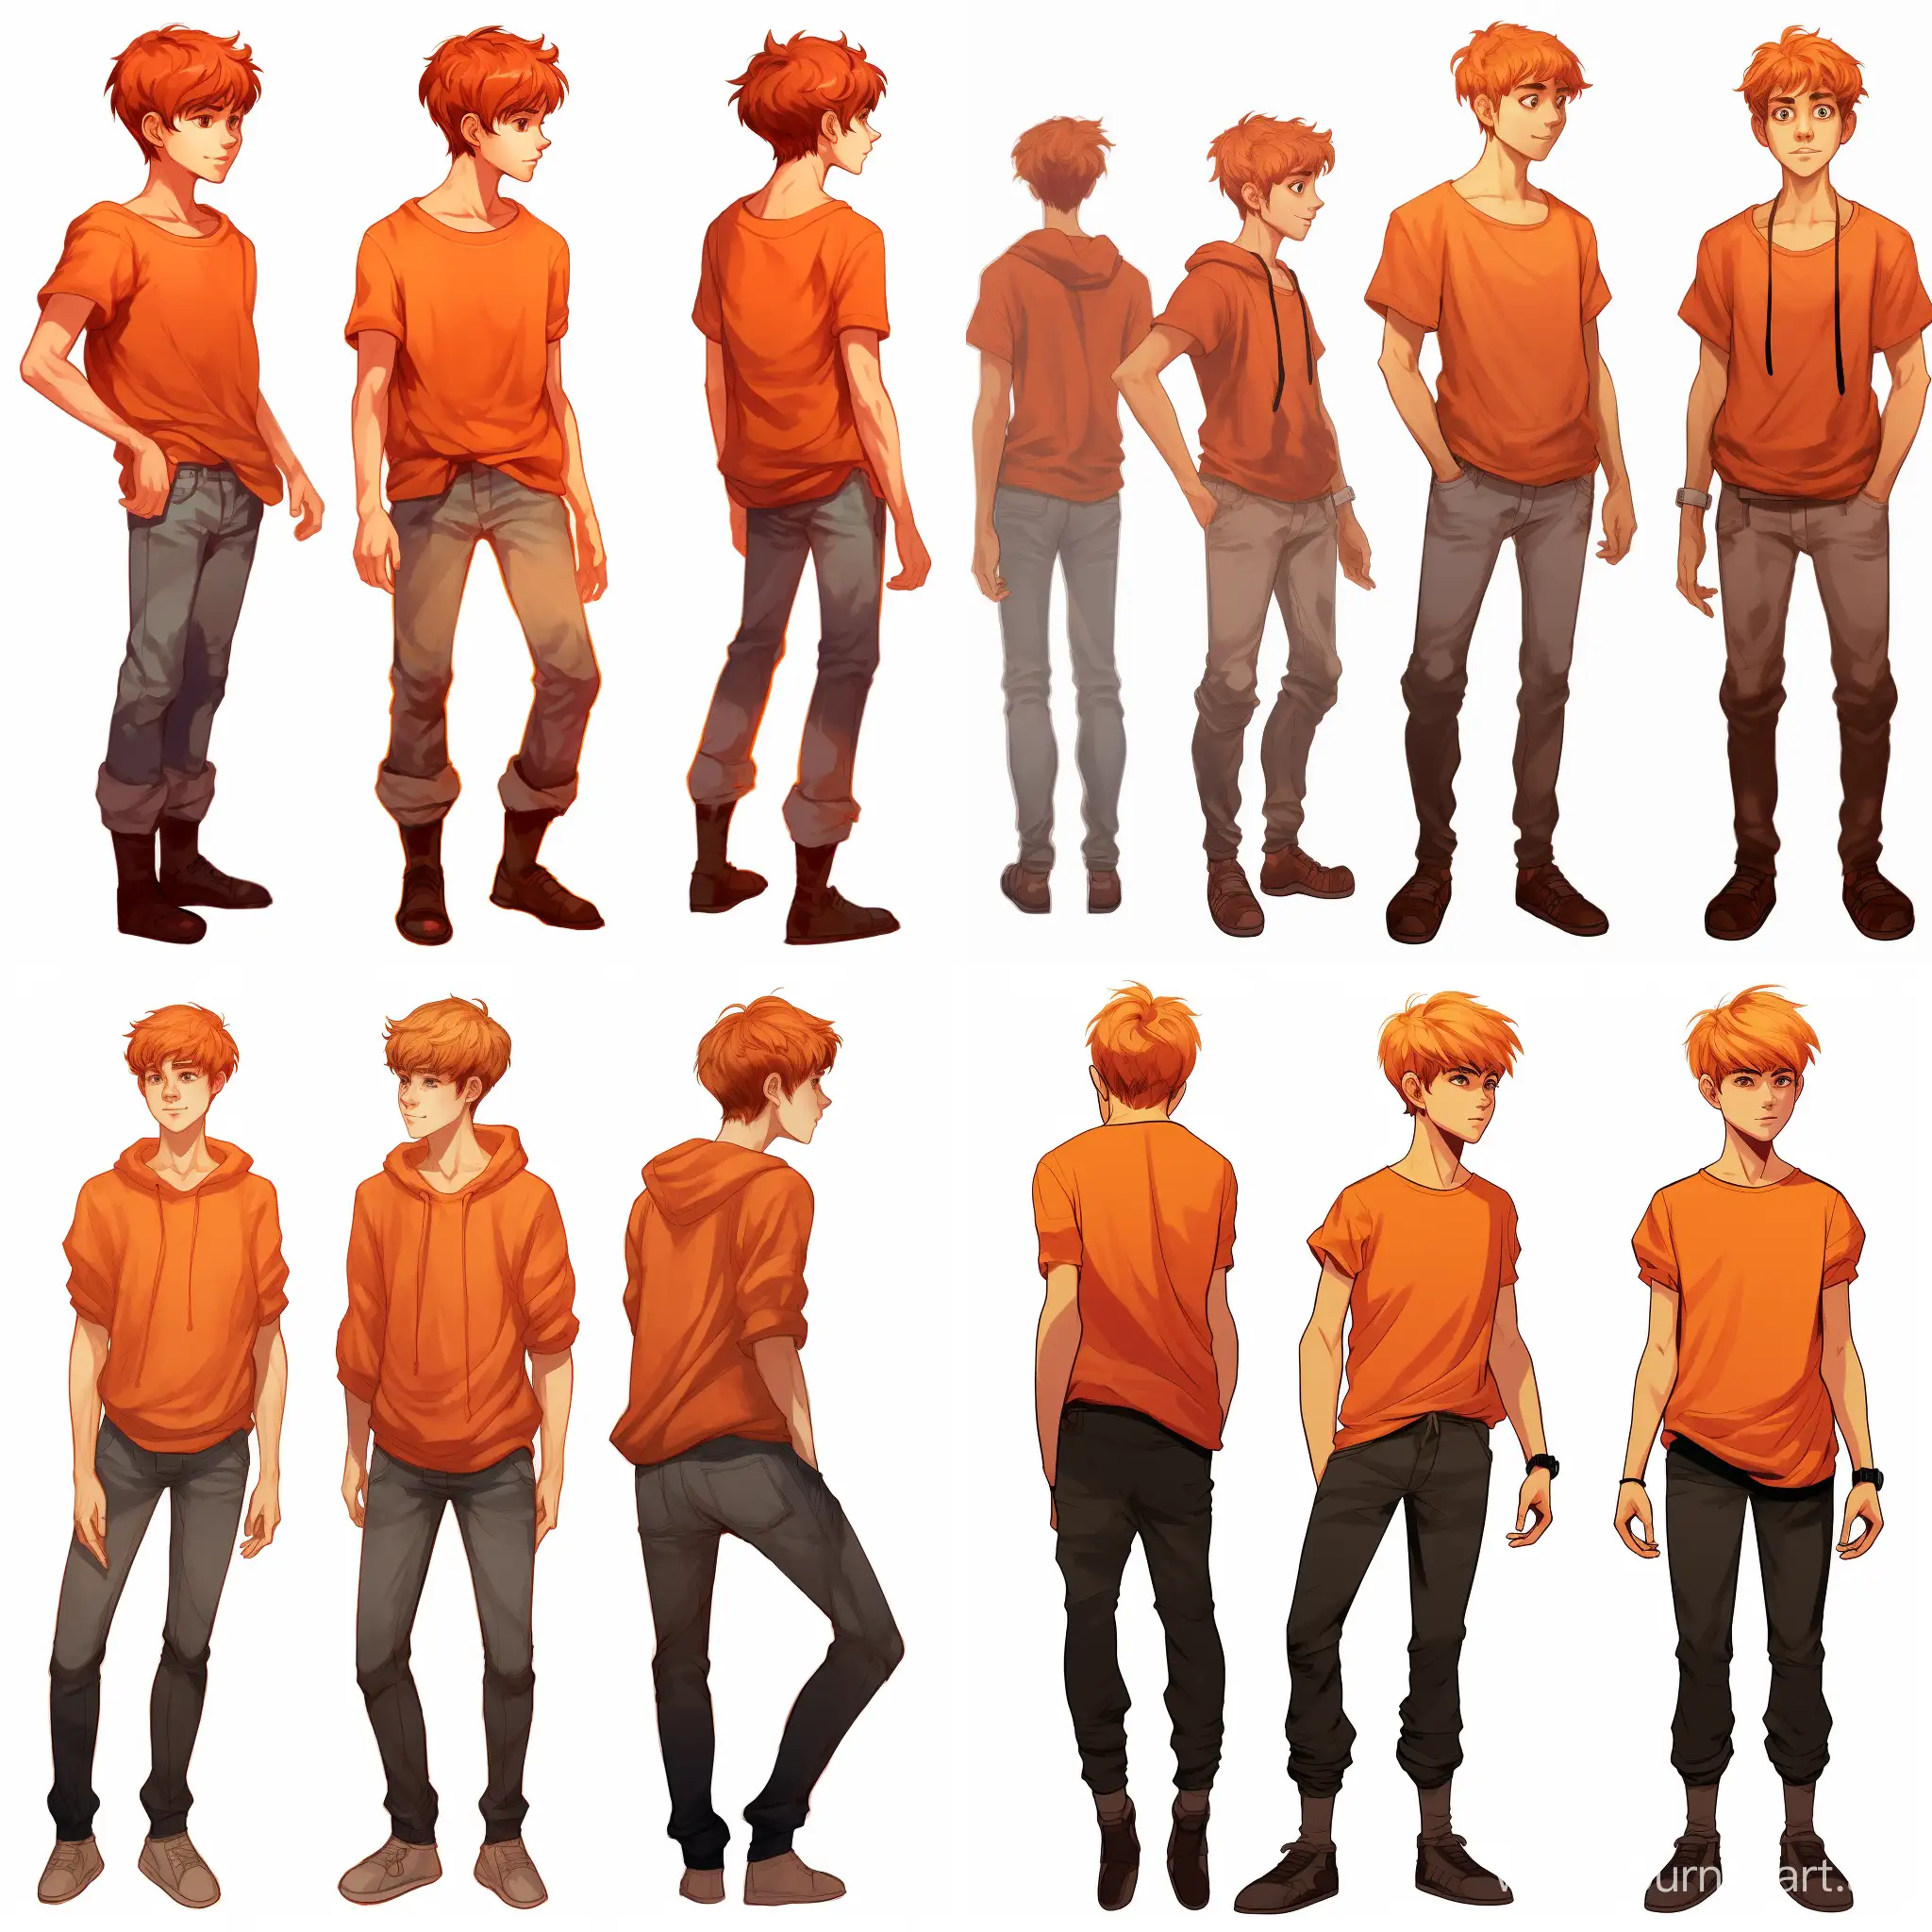 Vibrant-American-Teenager-with-Orange-Hair-in-Stylish-Attire